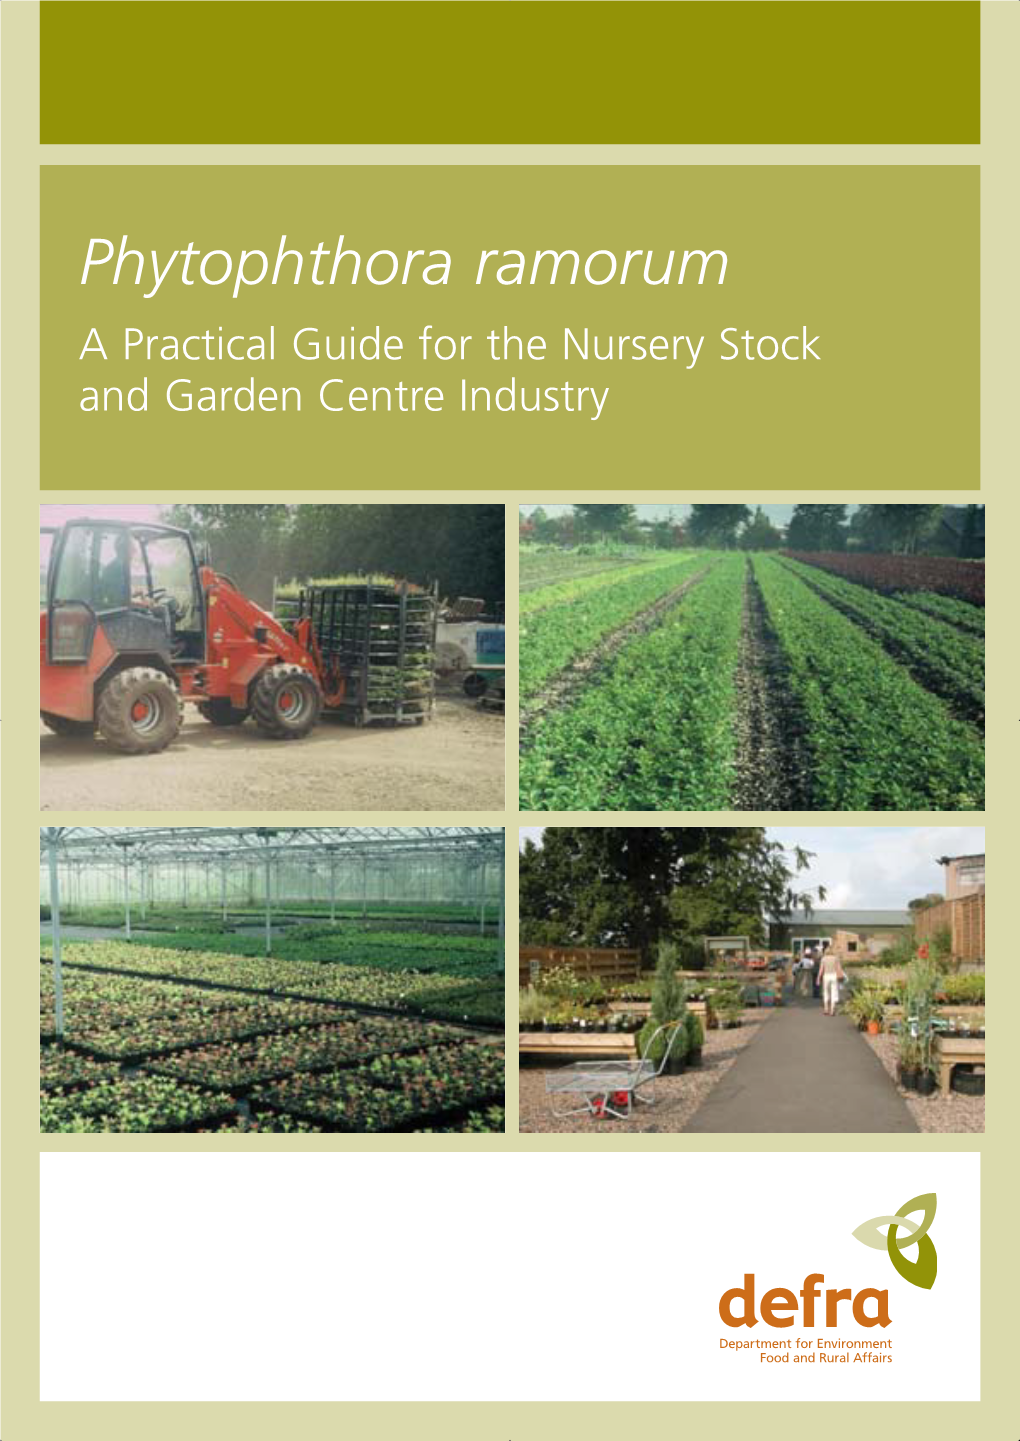 Phytophthora Ramorum a Practical Guide for the Nursery Stock and Garden Centre Industry PB 11041 PH Pramorun Cover.Qxd 9/8/05 2:35 Pm Page 4